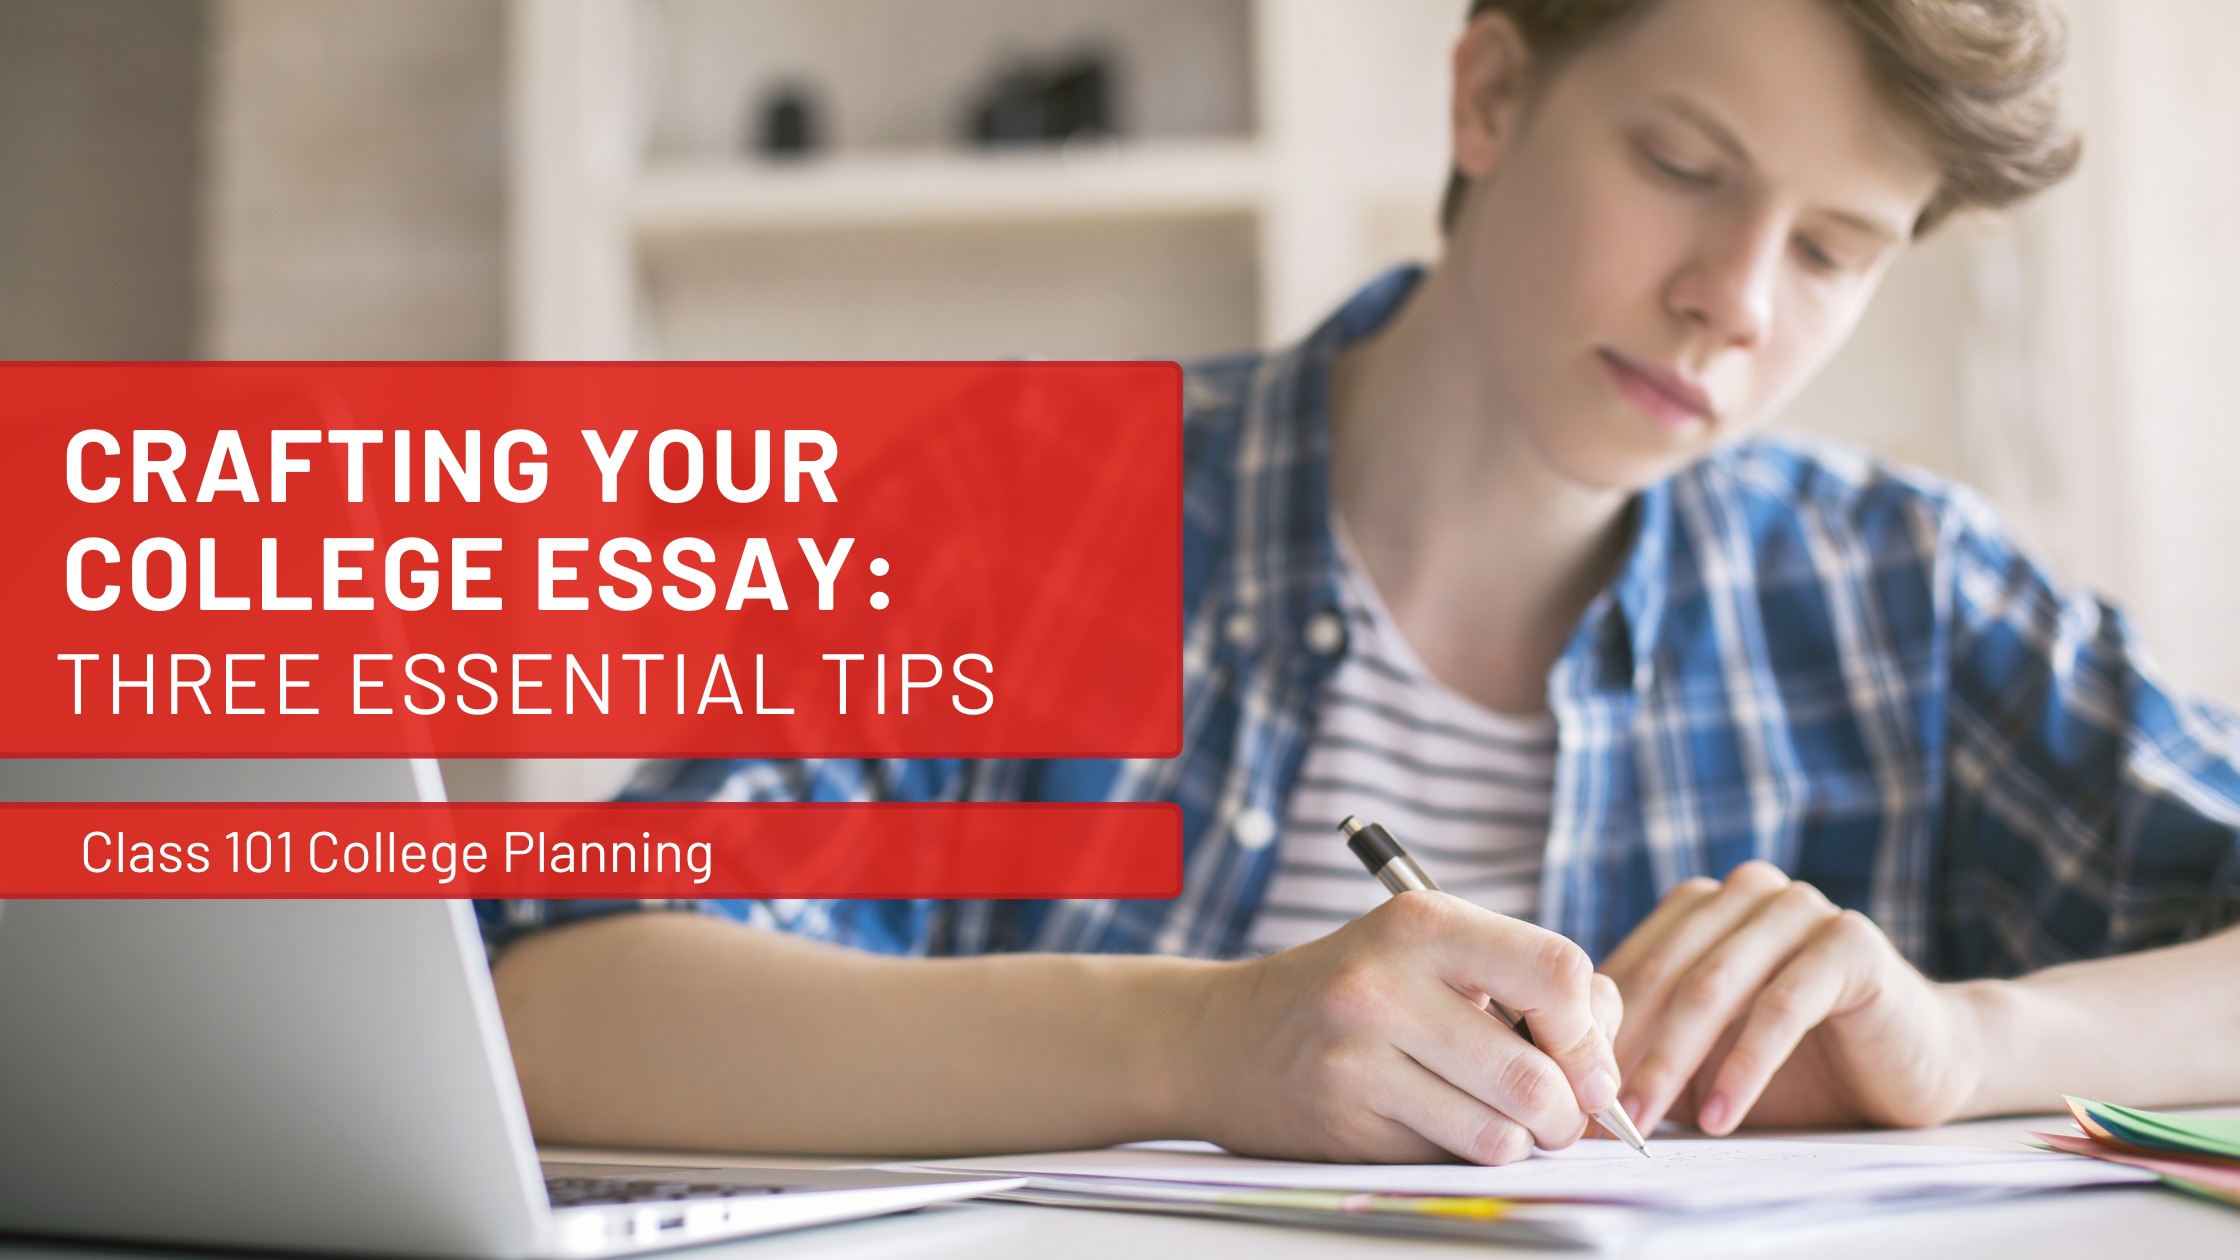 Application Essay Writing 101: Three Tips to Get Started